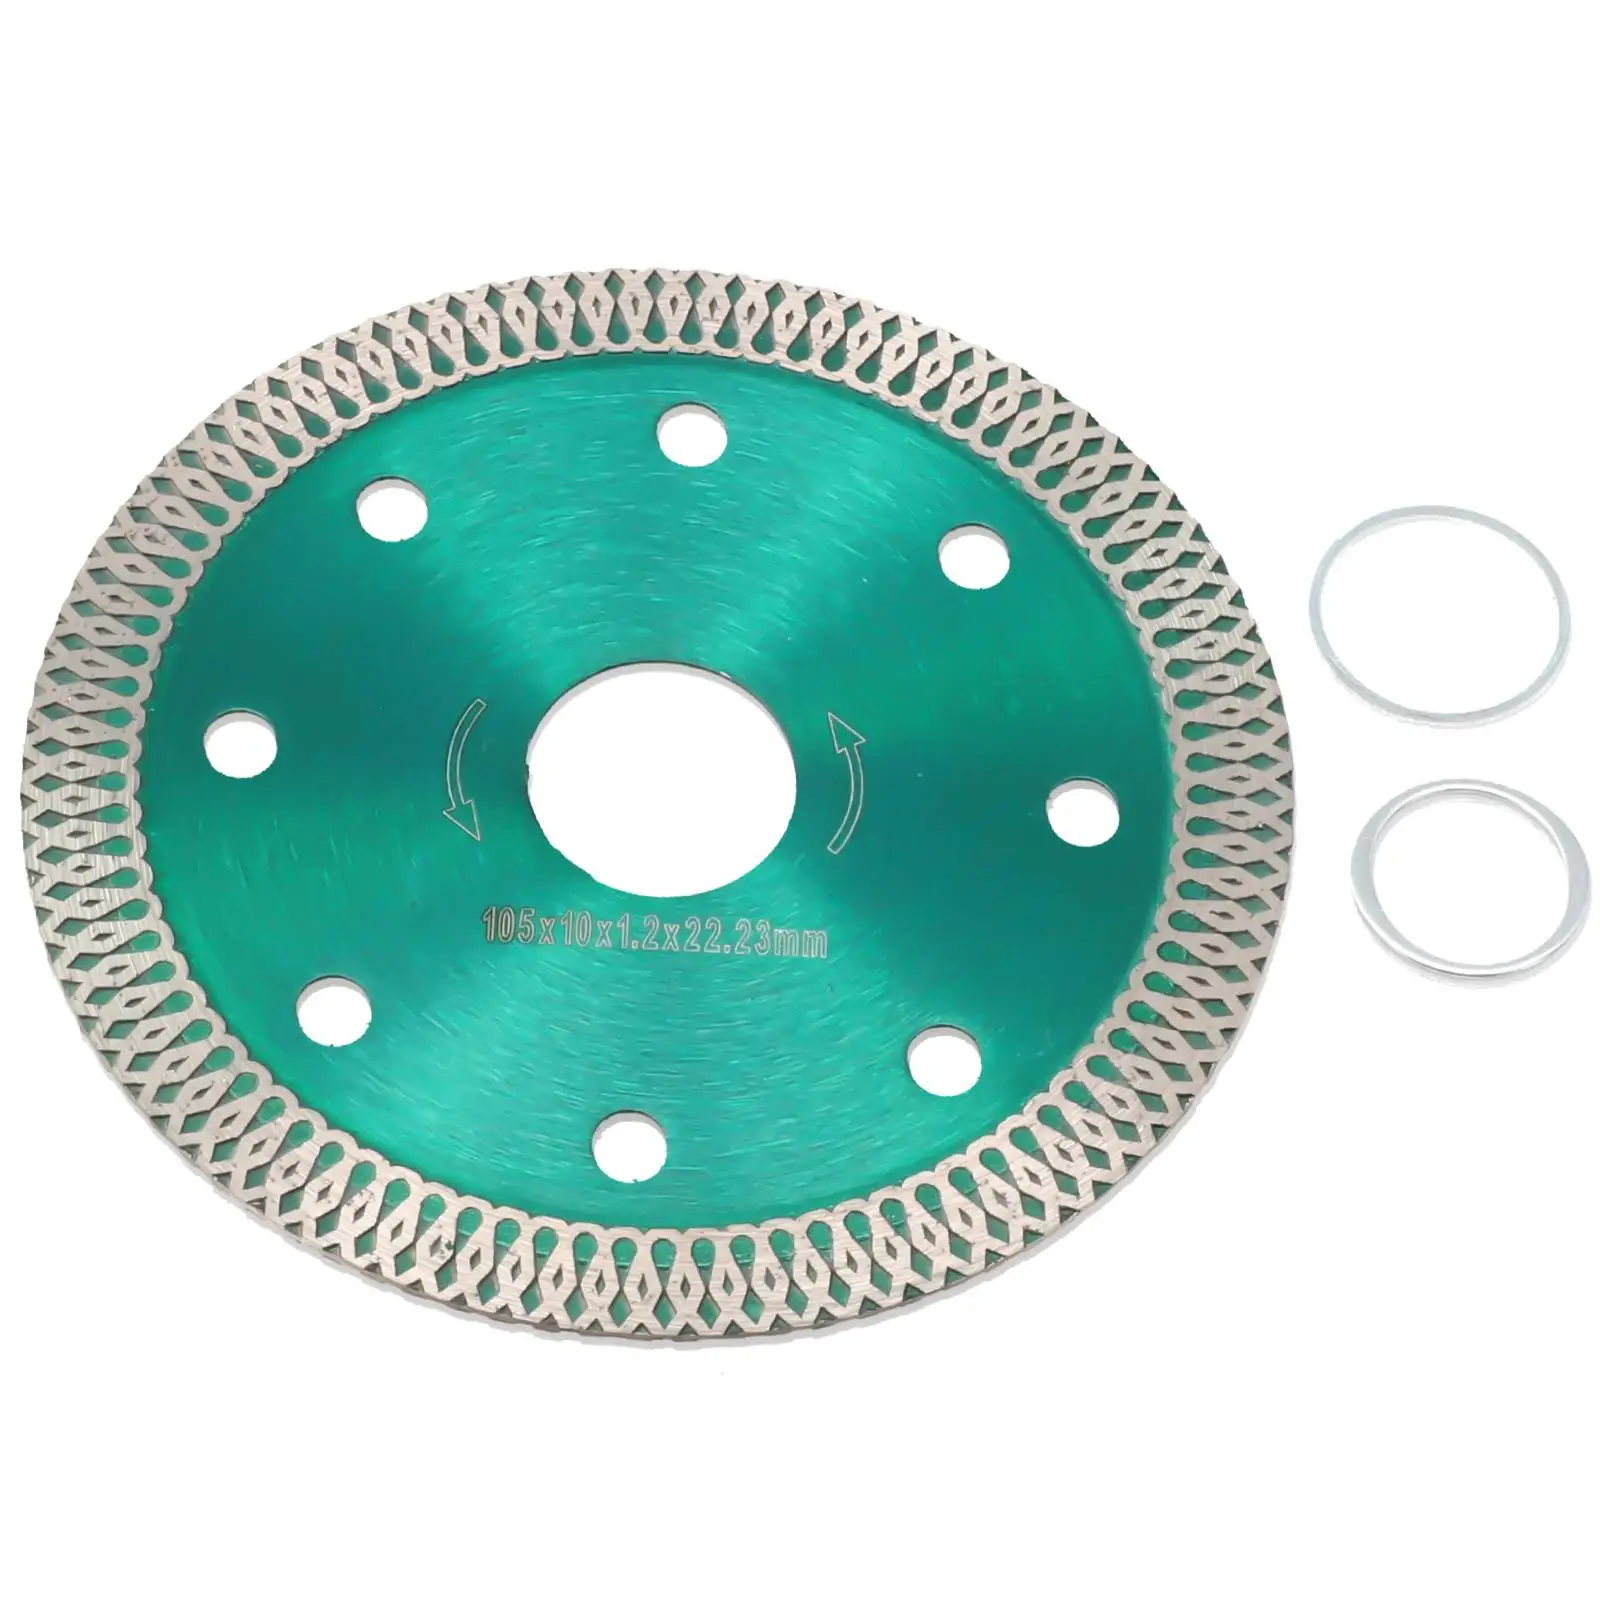 

Change Diameter Ring Diamond Saw Blade 115mm 125mm 22.23mm Core Thick Ness Inner Diameter 1.3mm Hard Material Without Cracking